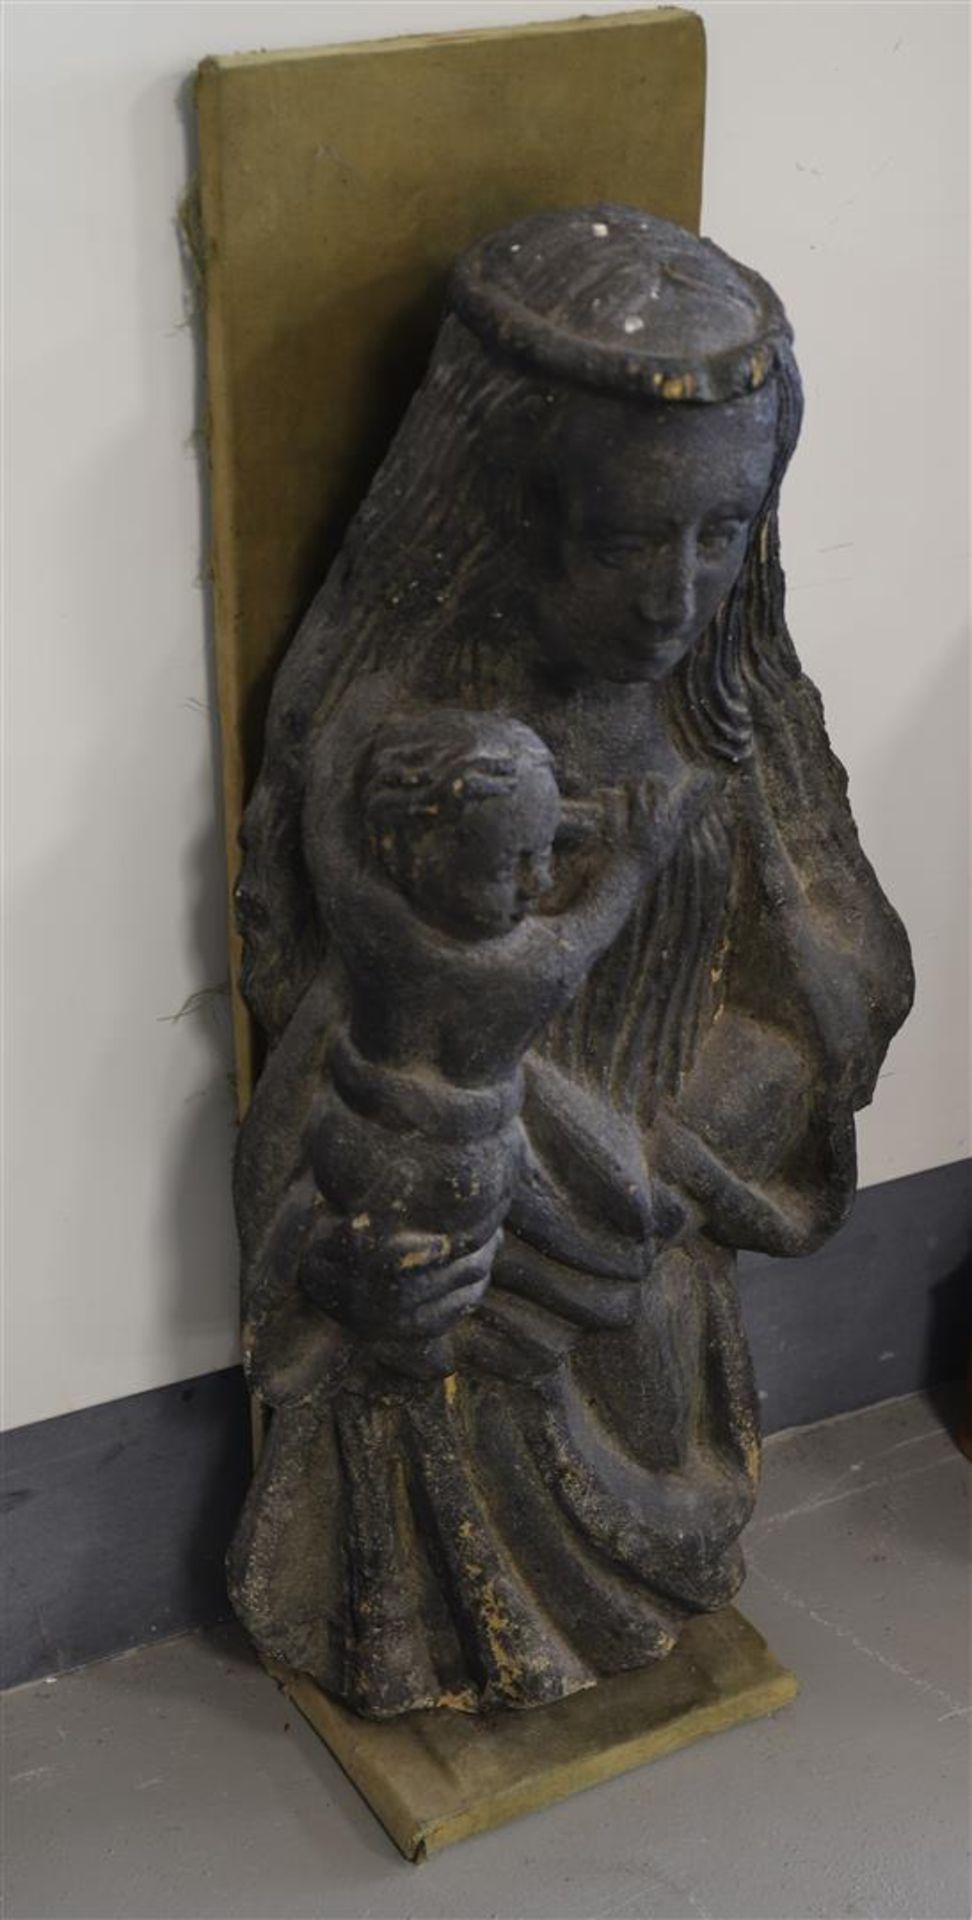 A sandstone sculpture of Mary with child, Southern Netherlands, ca. 1930 - Image 3 of 3